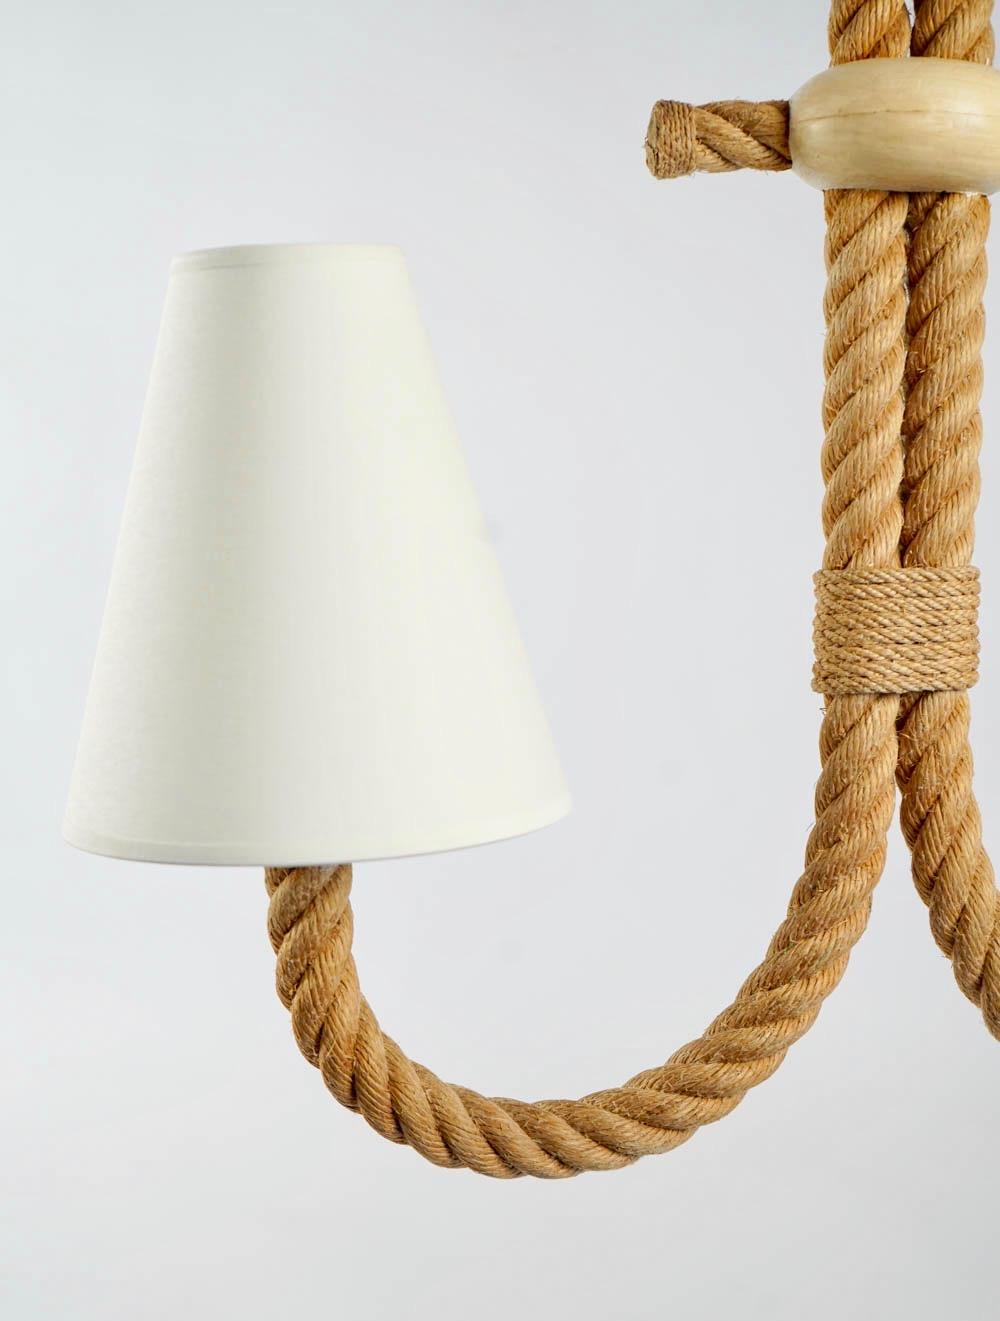 All made of weaved rope. Two lighted arms curved in shaped of marine anchor. 
Two lampshades made of off-white cotton.
Two bulbs.

Adrien Audoux and Frida Minet are known for their rope lights and furniture. 
Their first workshop have been